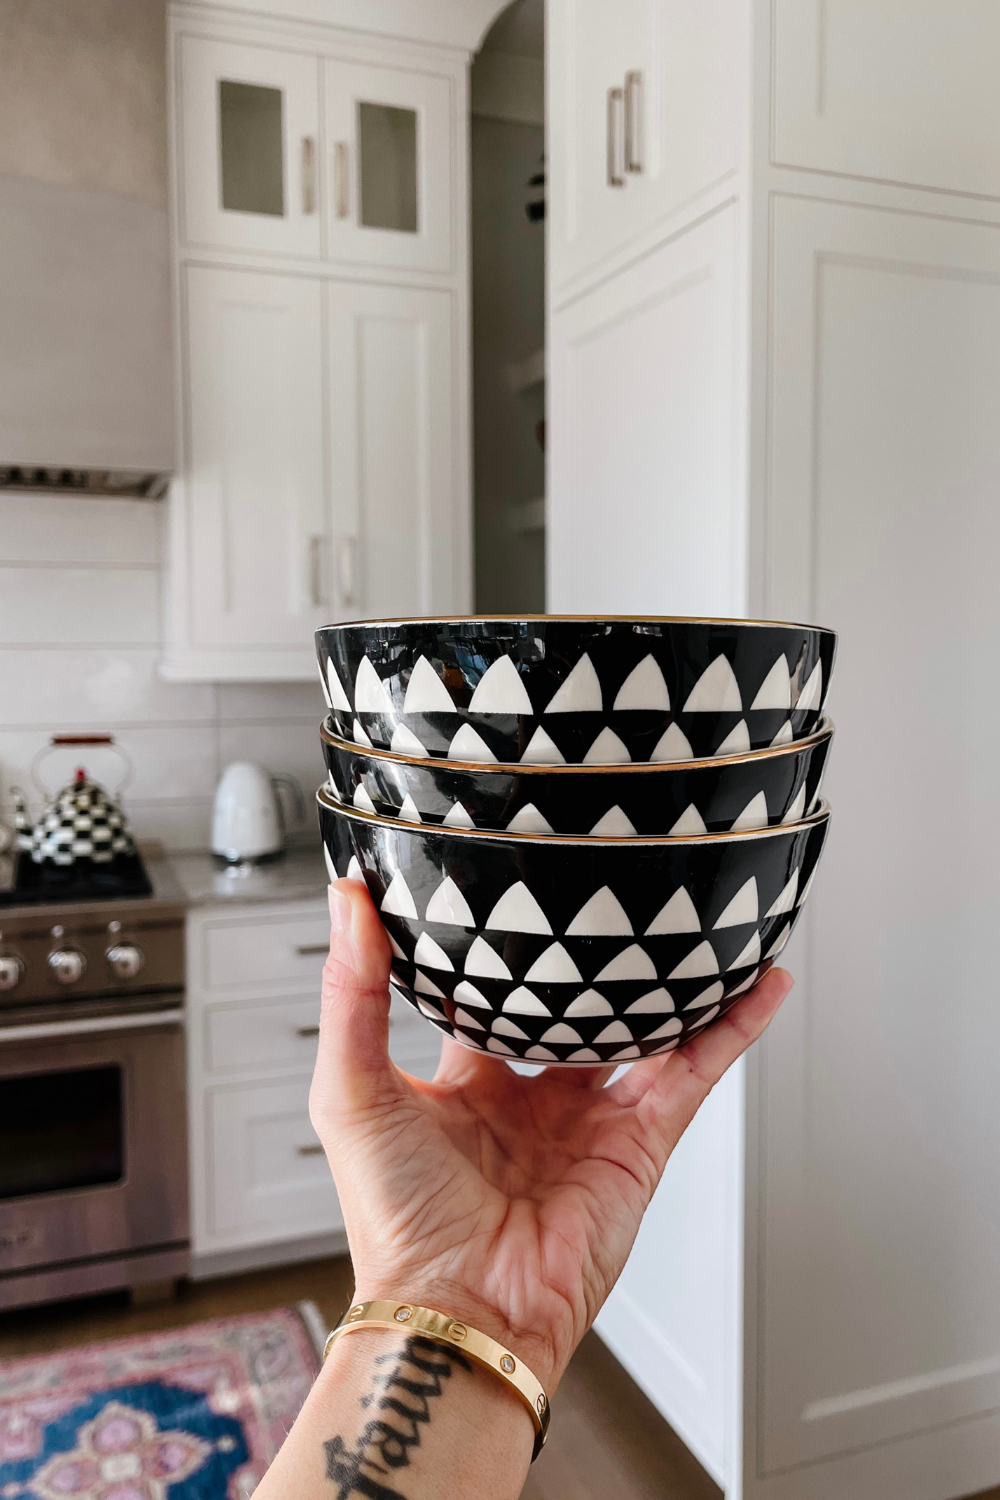 Black and white printed bowls